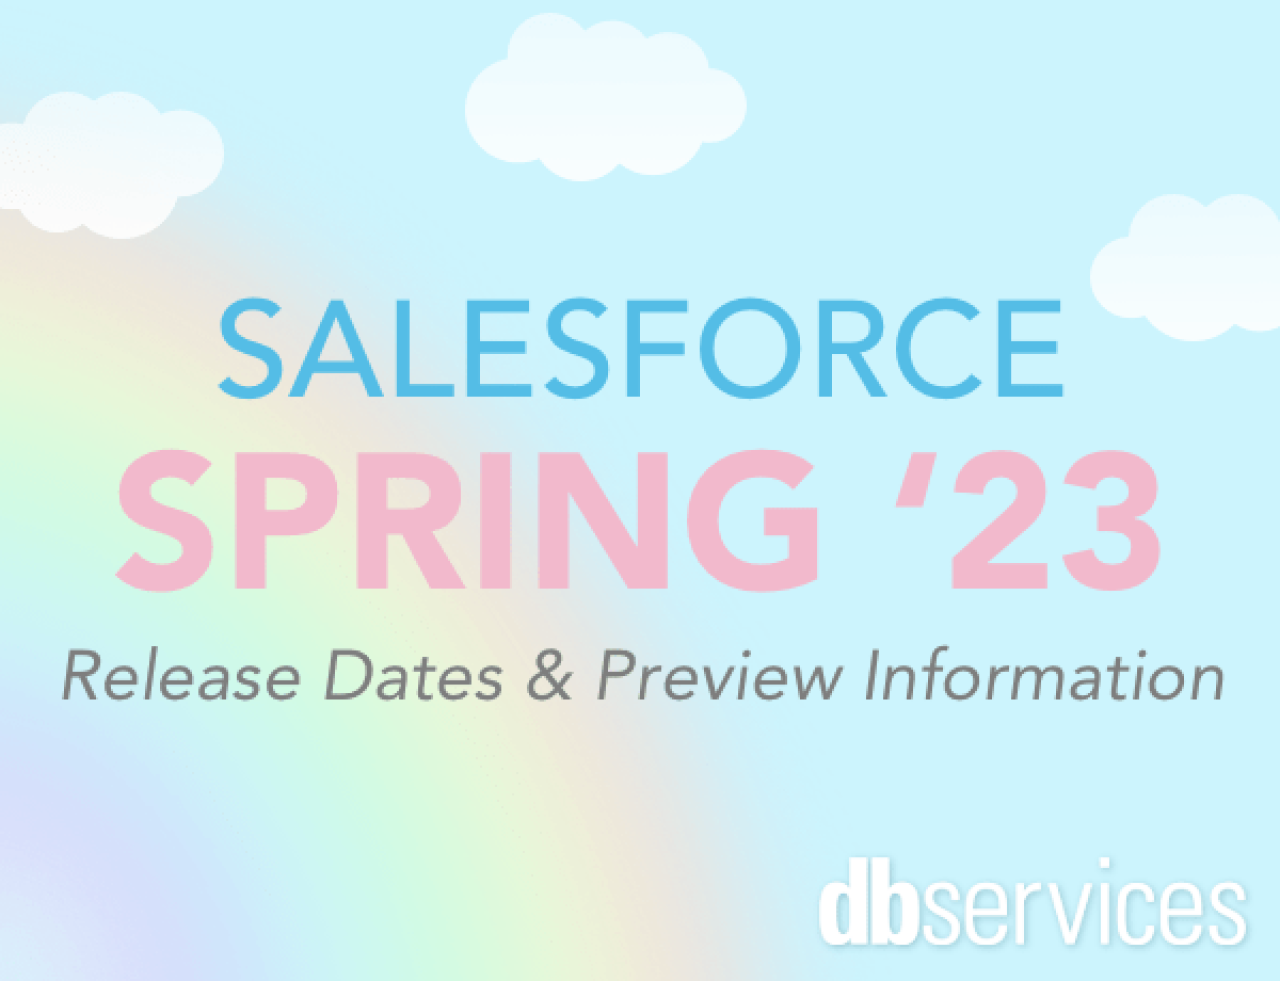 salesforce spring 23 release dates and preview information.